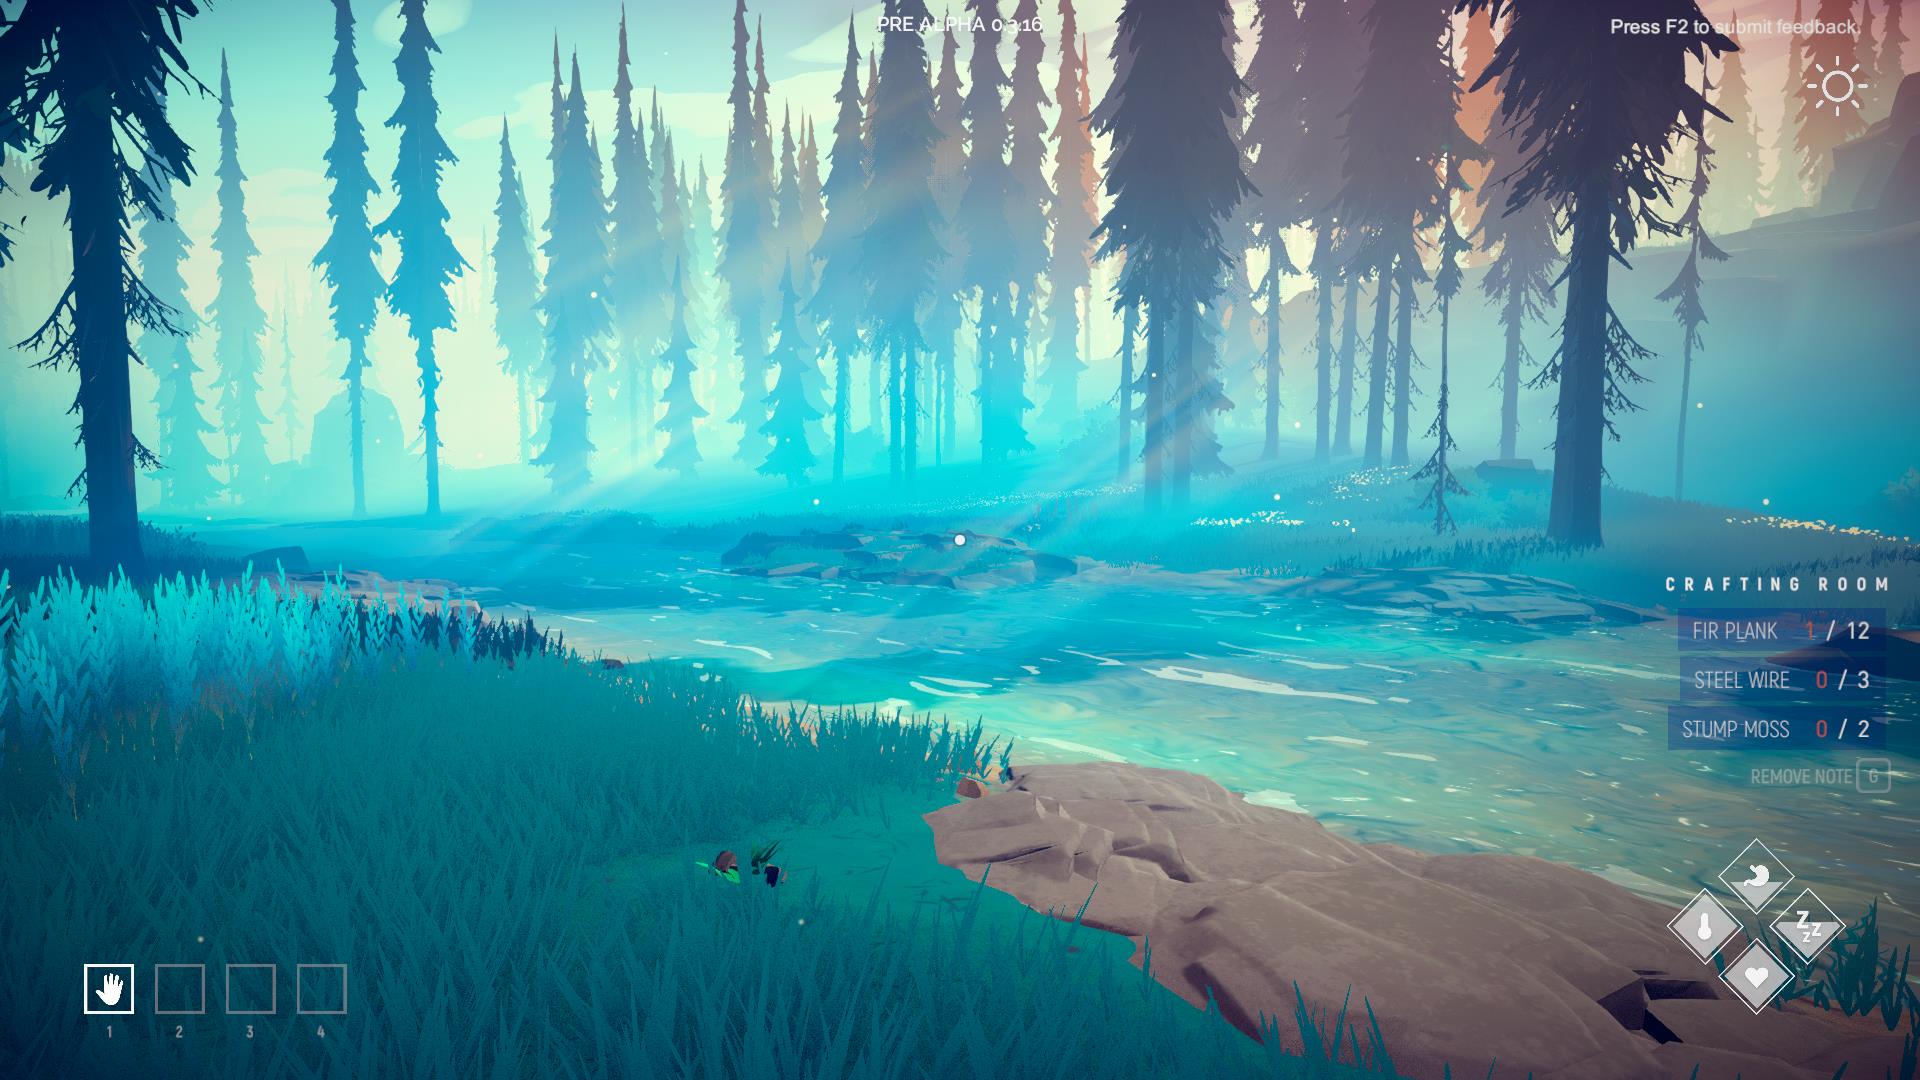 Among Trees early access impressions.